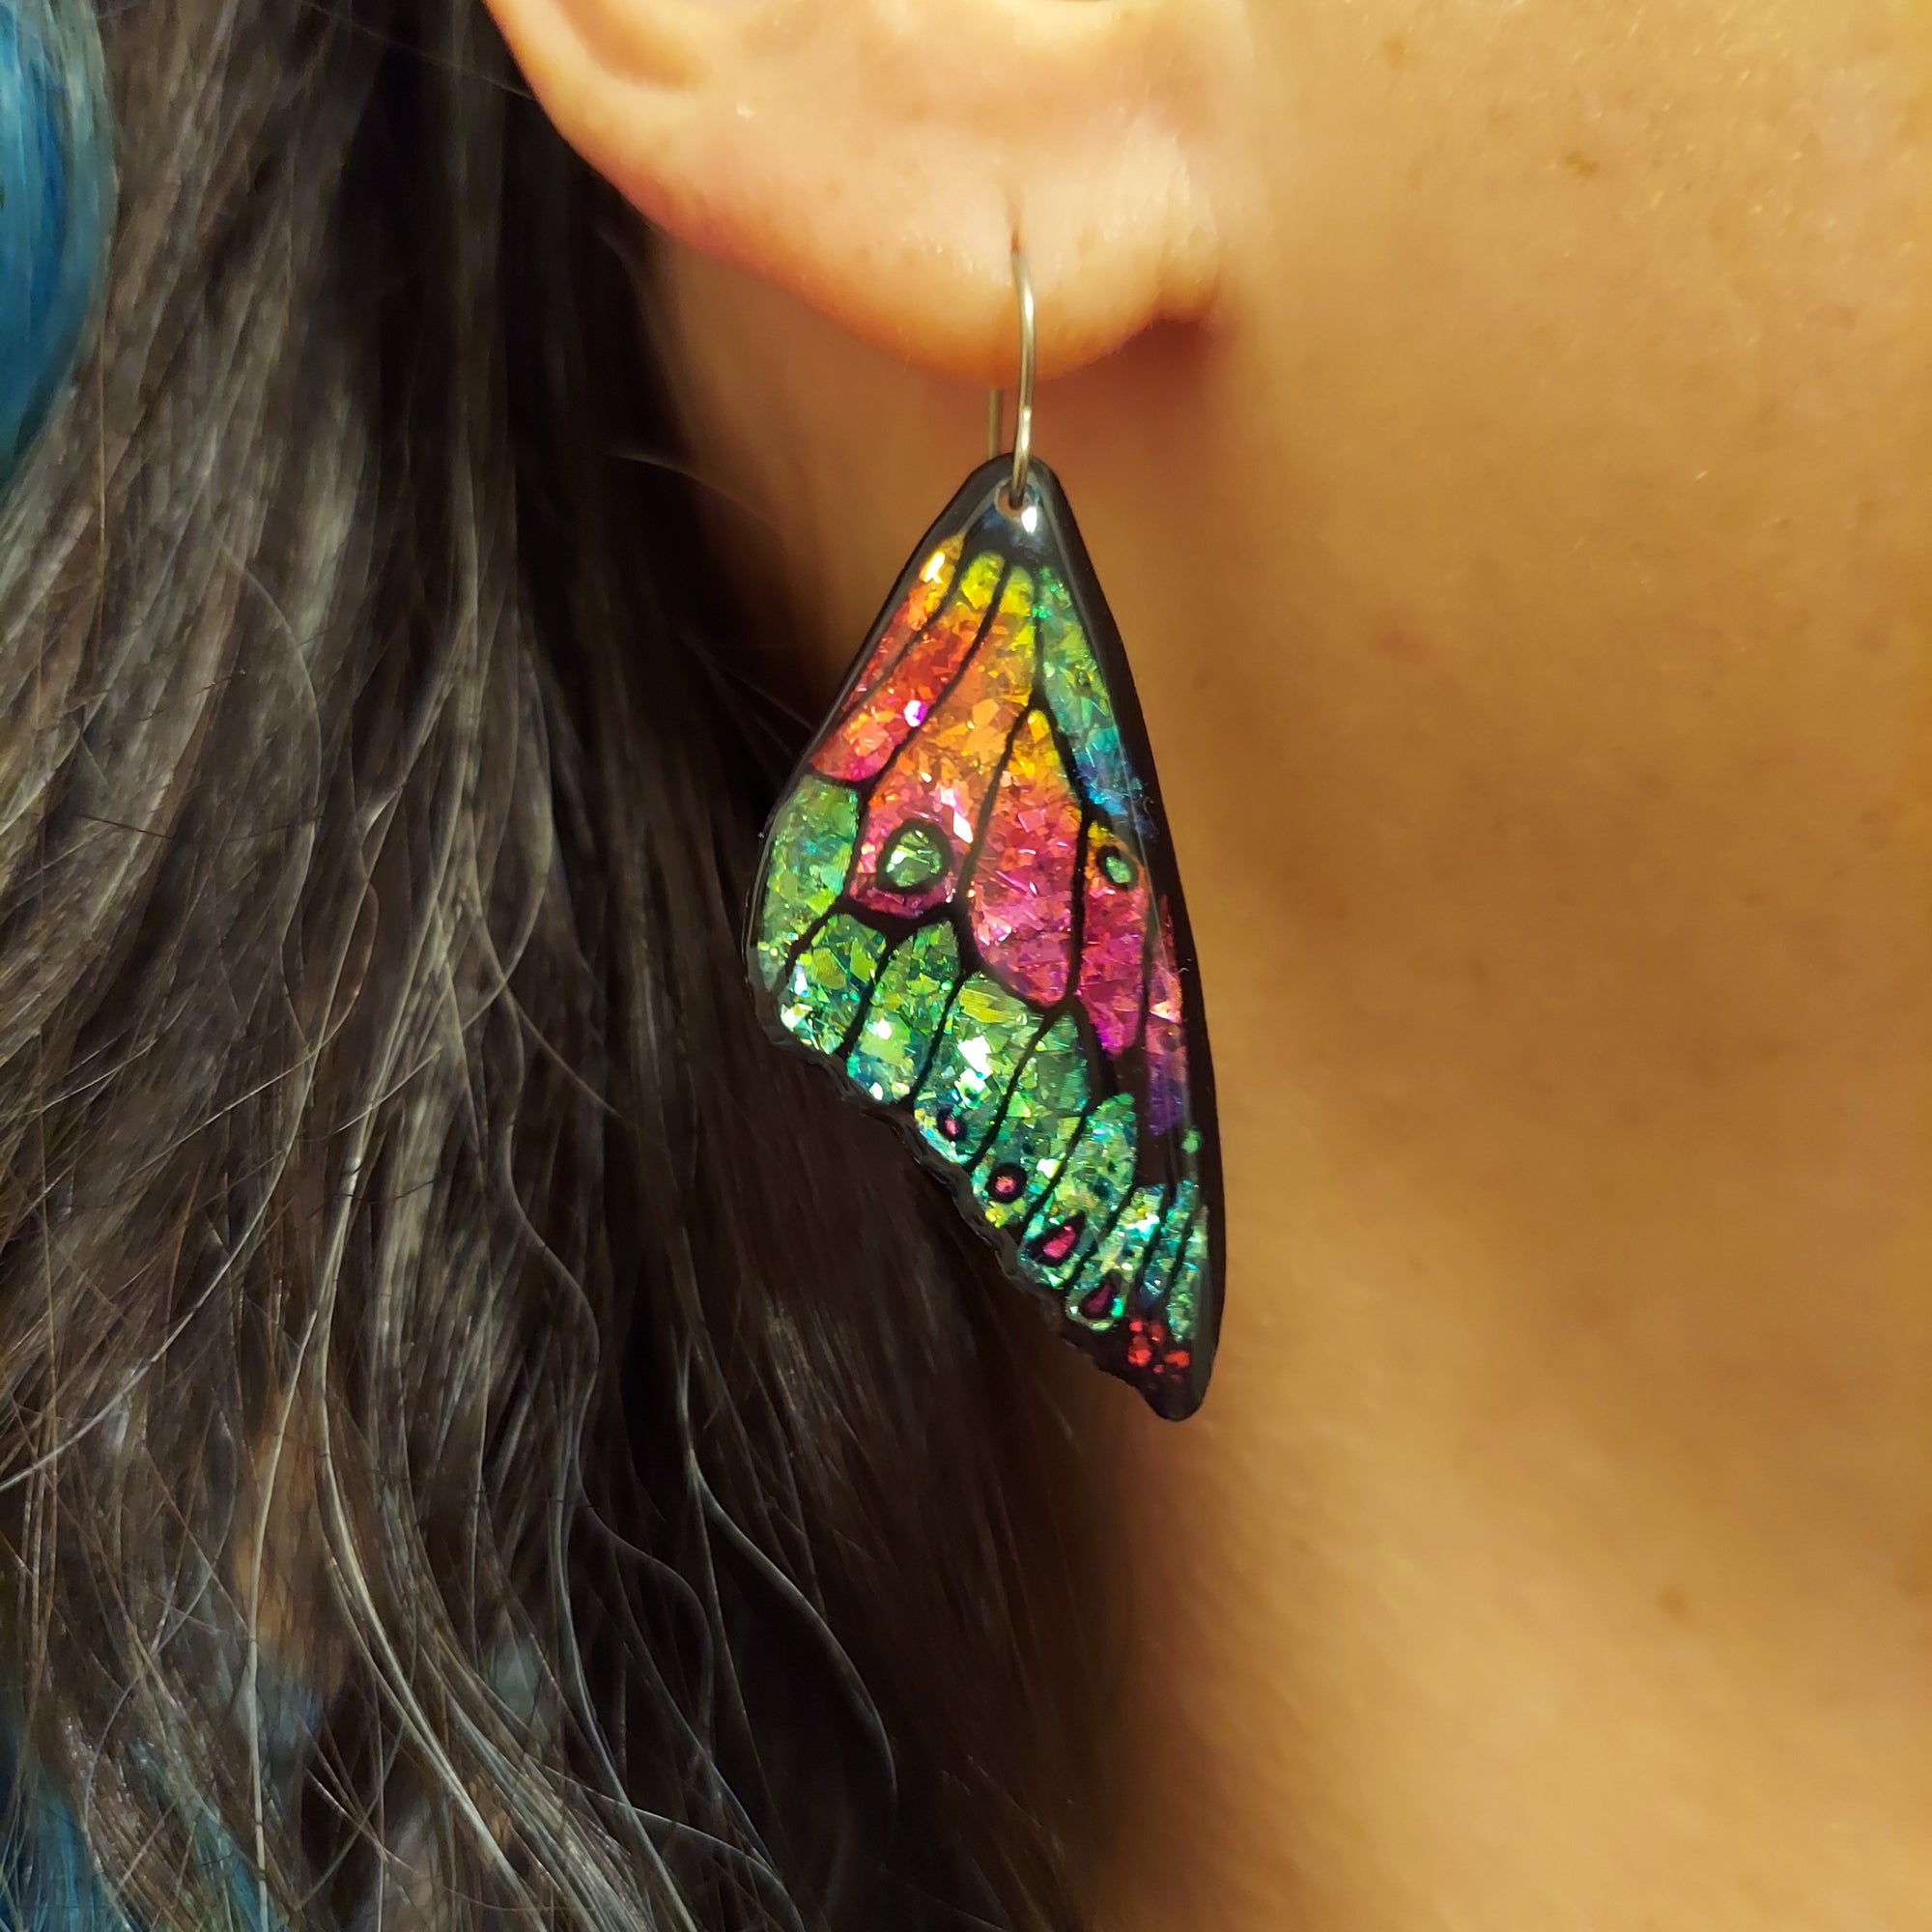 # 35 (1) Large Green Purple Sparkly Butterfly Wing Earrings